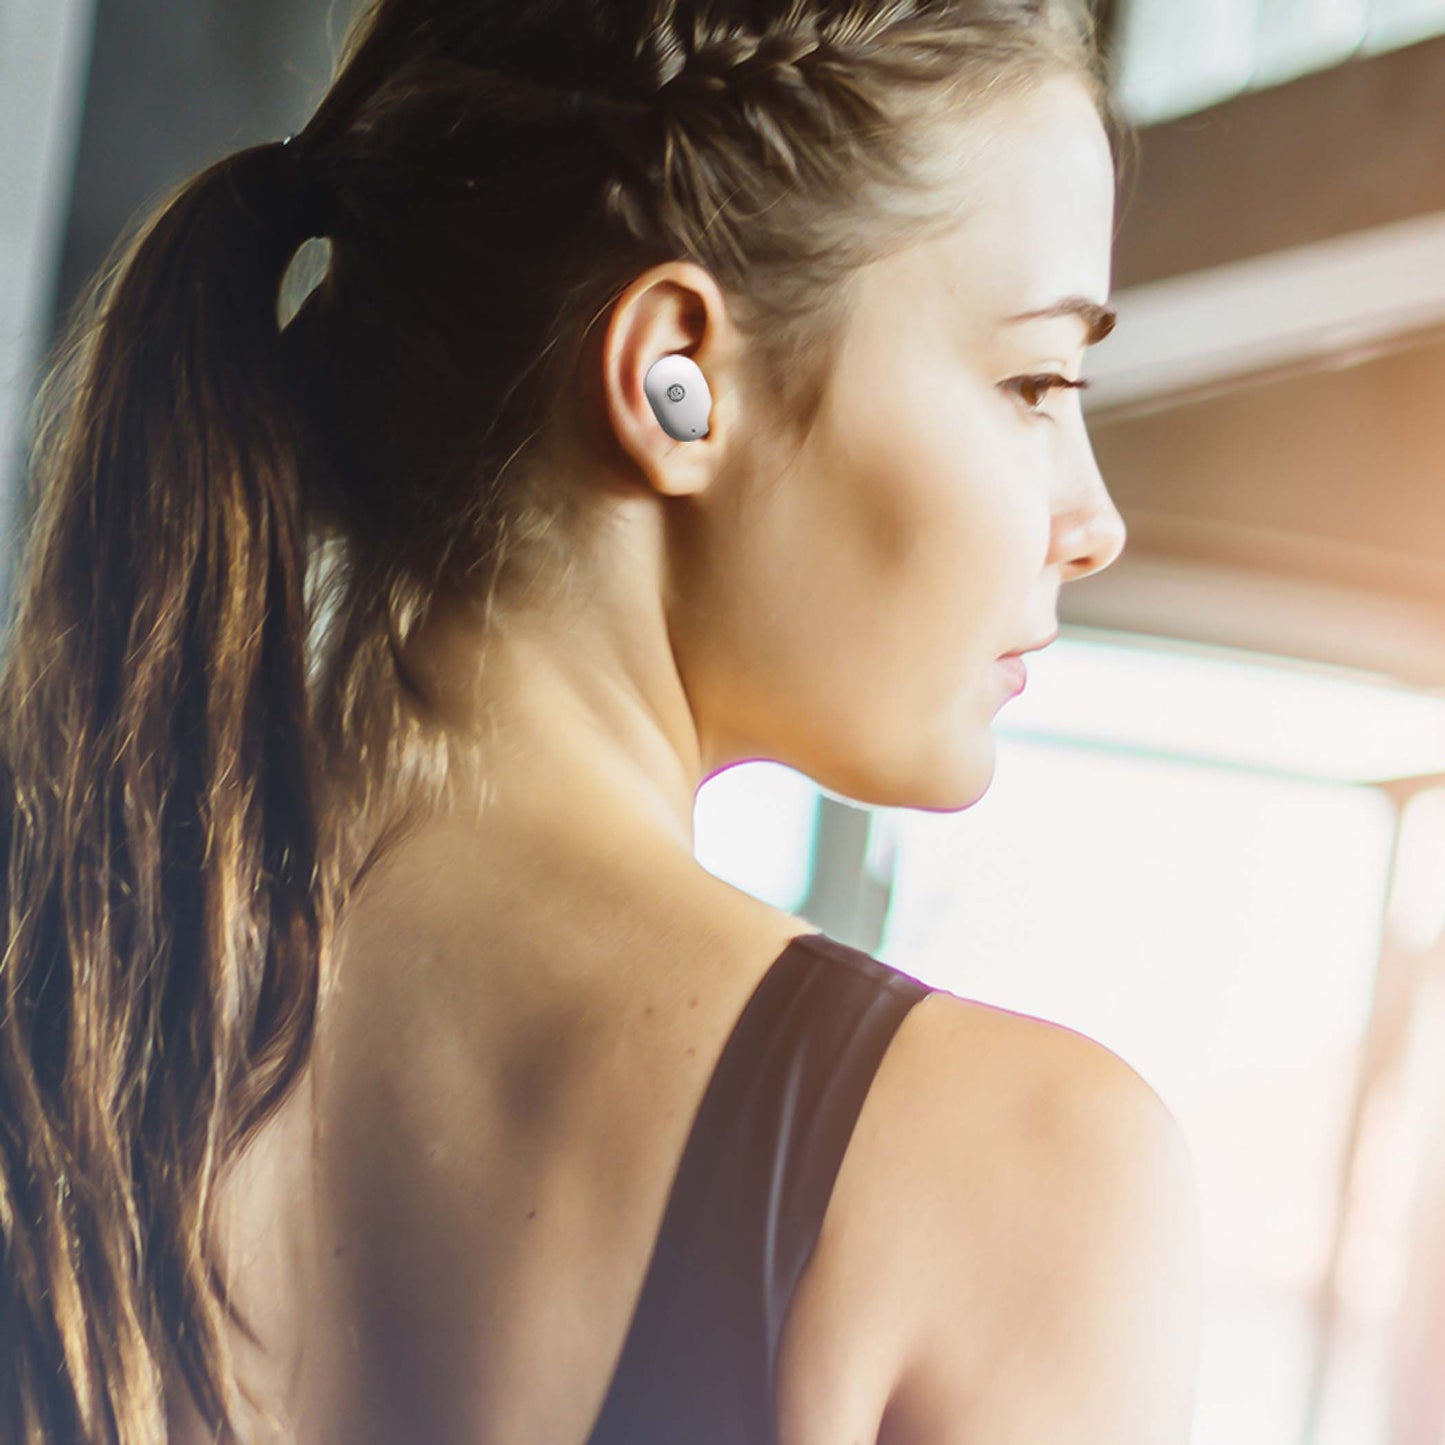 Photo of Morpheus 360 Spire True Wireless Earbuds, a white female wearing the Spire True Wireless Earbuds while working out they are Ultra-Light Weight, Touch Control, Sweatproof. 